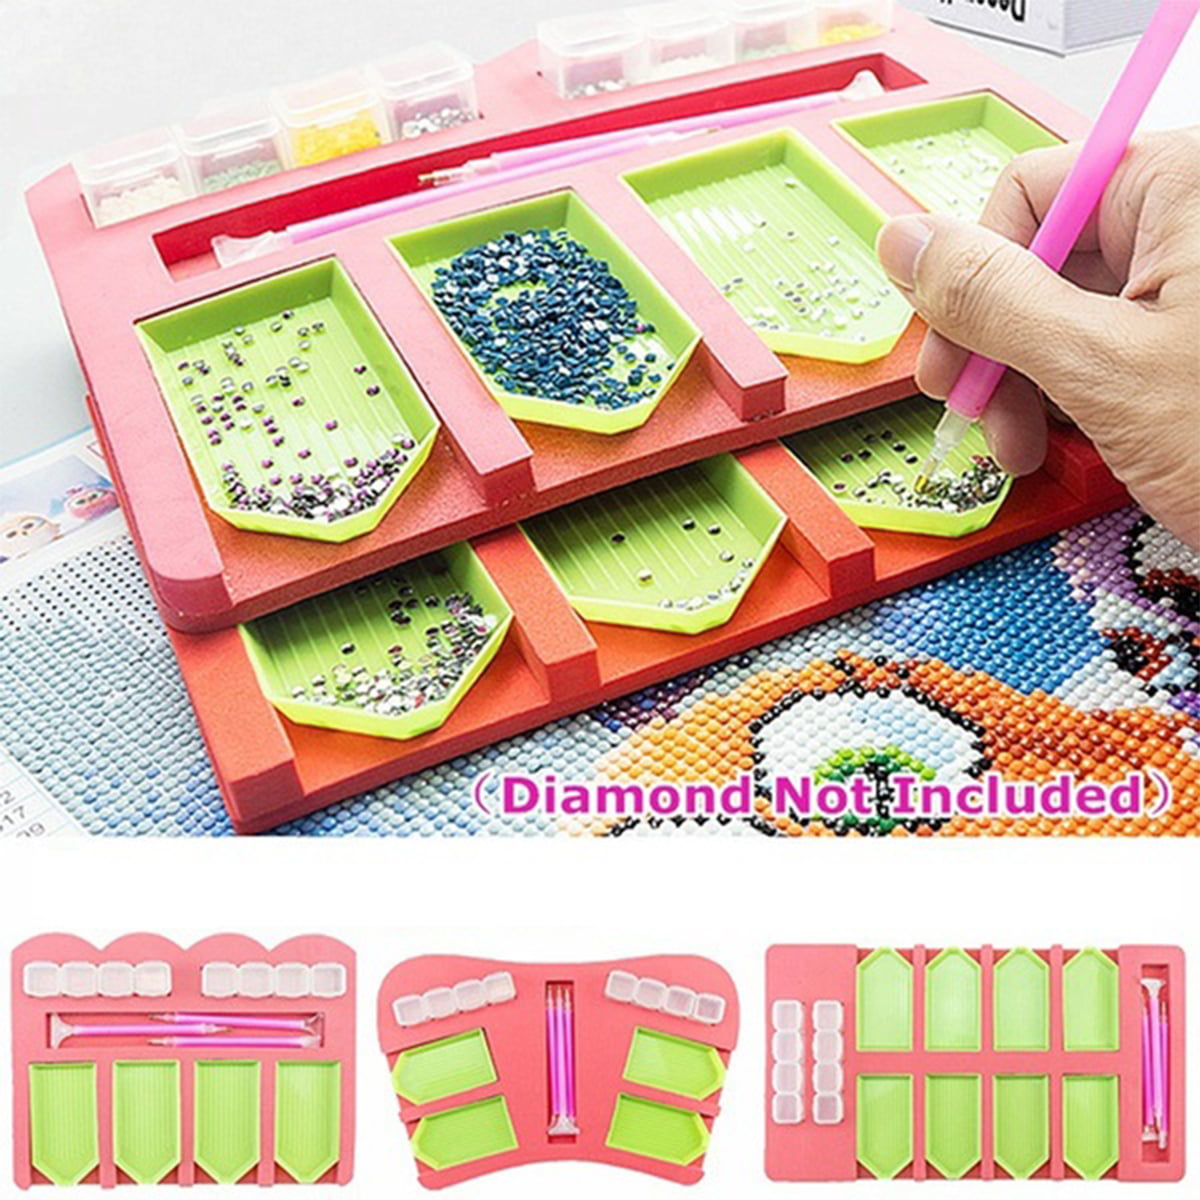 Personalized Drill Tray Diamond Painting Tray Square Diamond Painting Drill Tray Diamond Painting Accessories